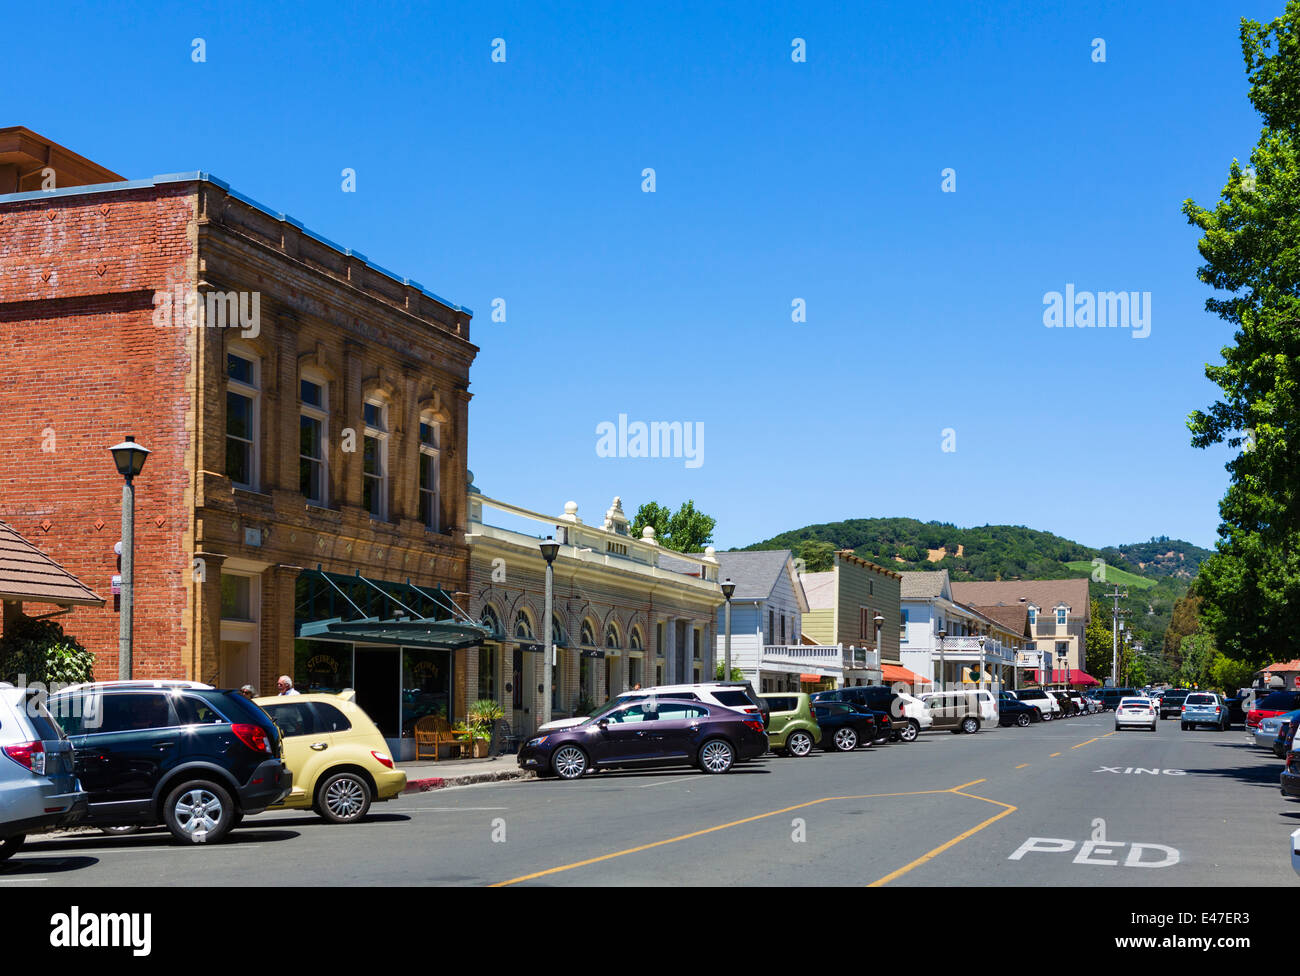 Shops along 1st St W in the Main Square, Sonoma, Sonoma Valley, Wine Country, California, USA Stock Photo